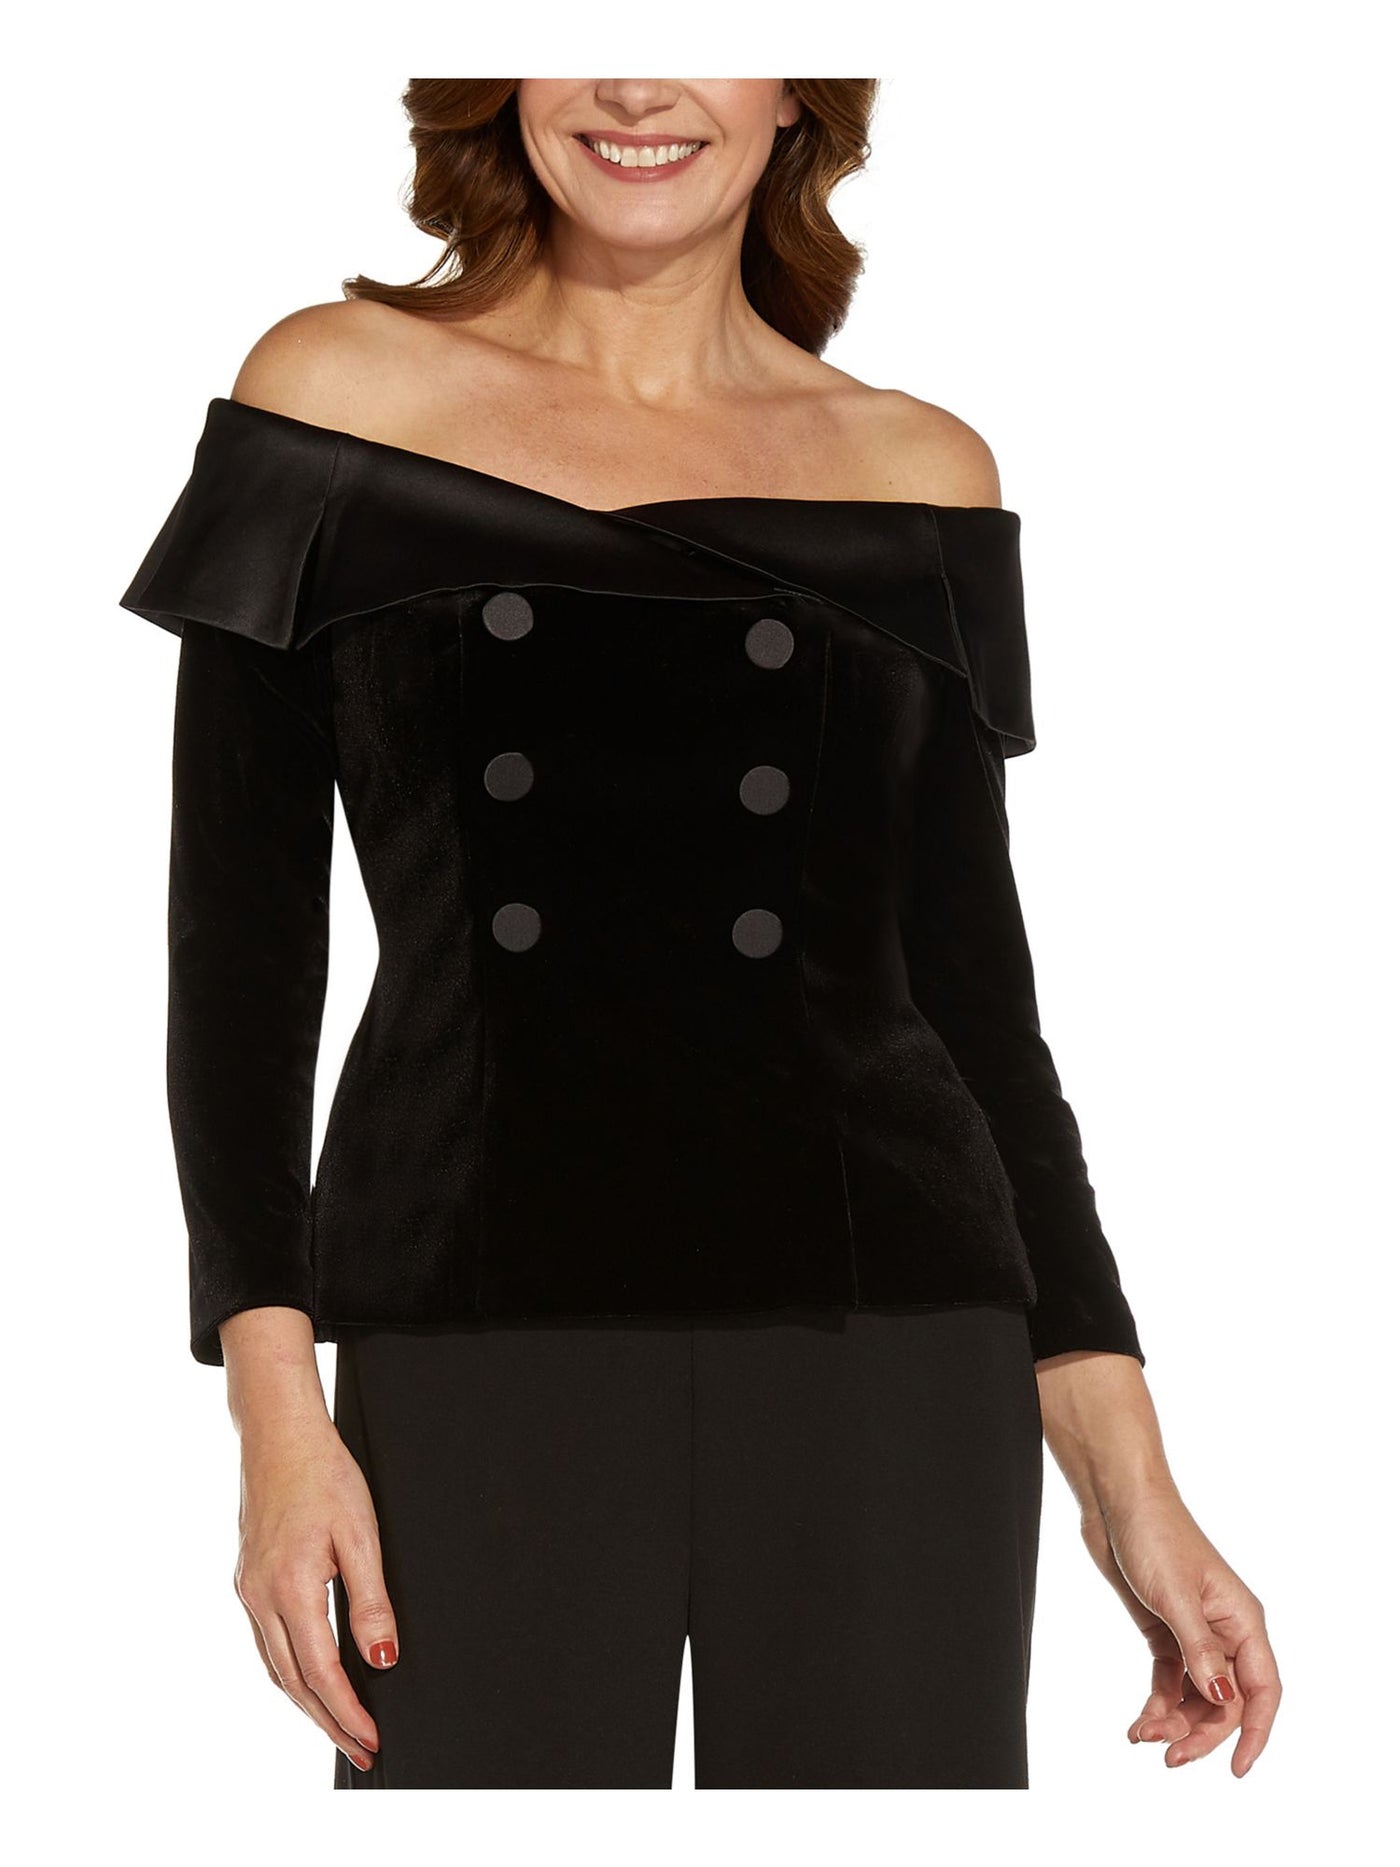 ADRIANNA PAPELL Womens Black Zippered Slitted Decorative Buttons Lined Long Sleeve Off Shoulder Evening Top 10